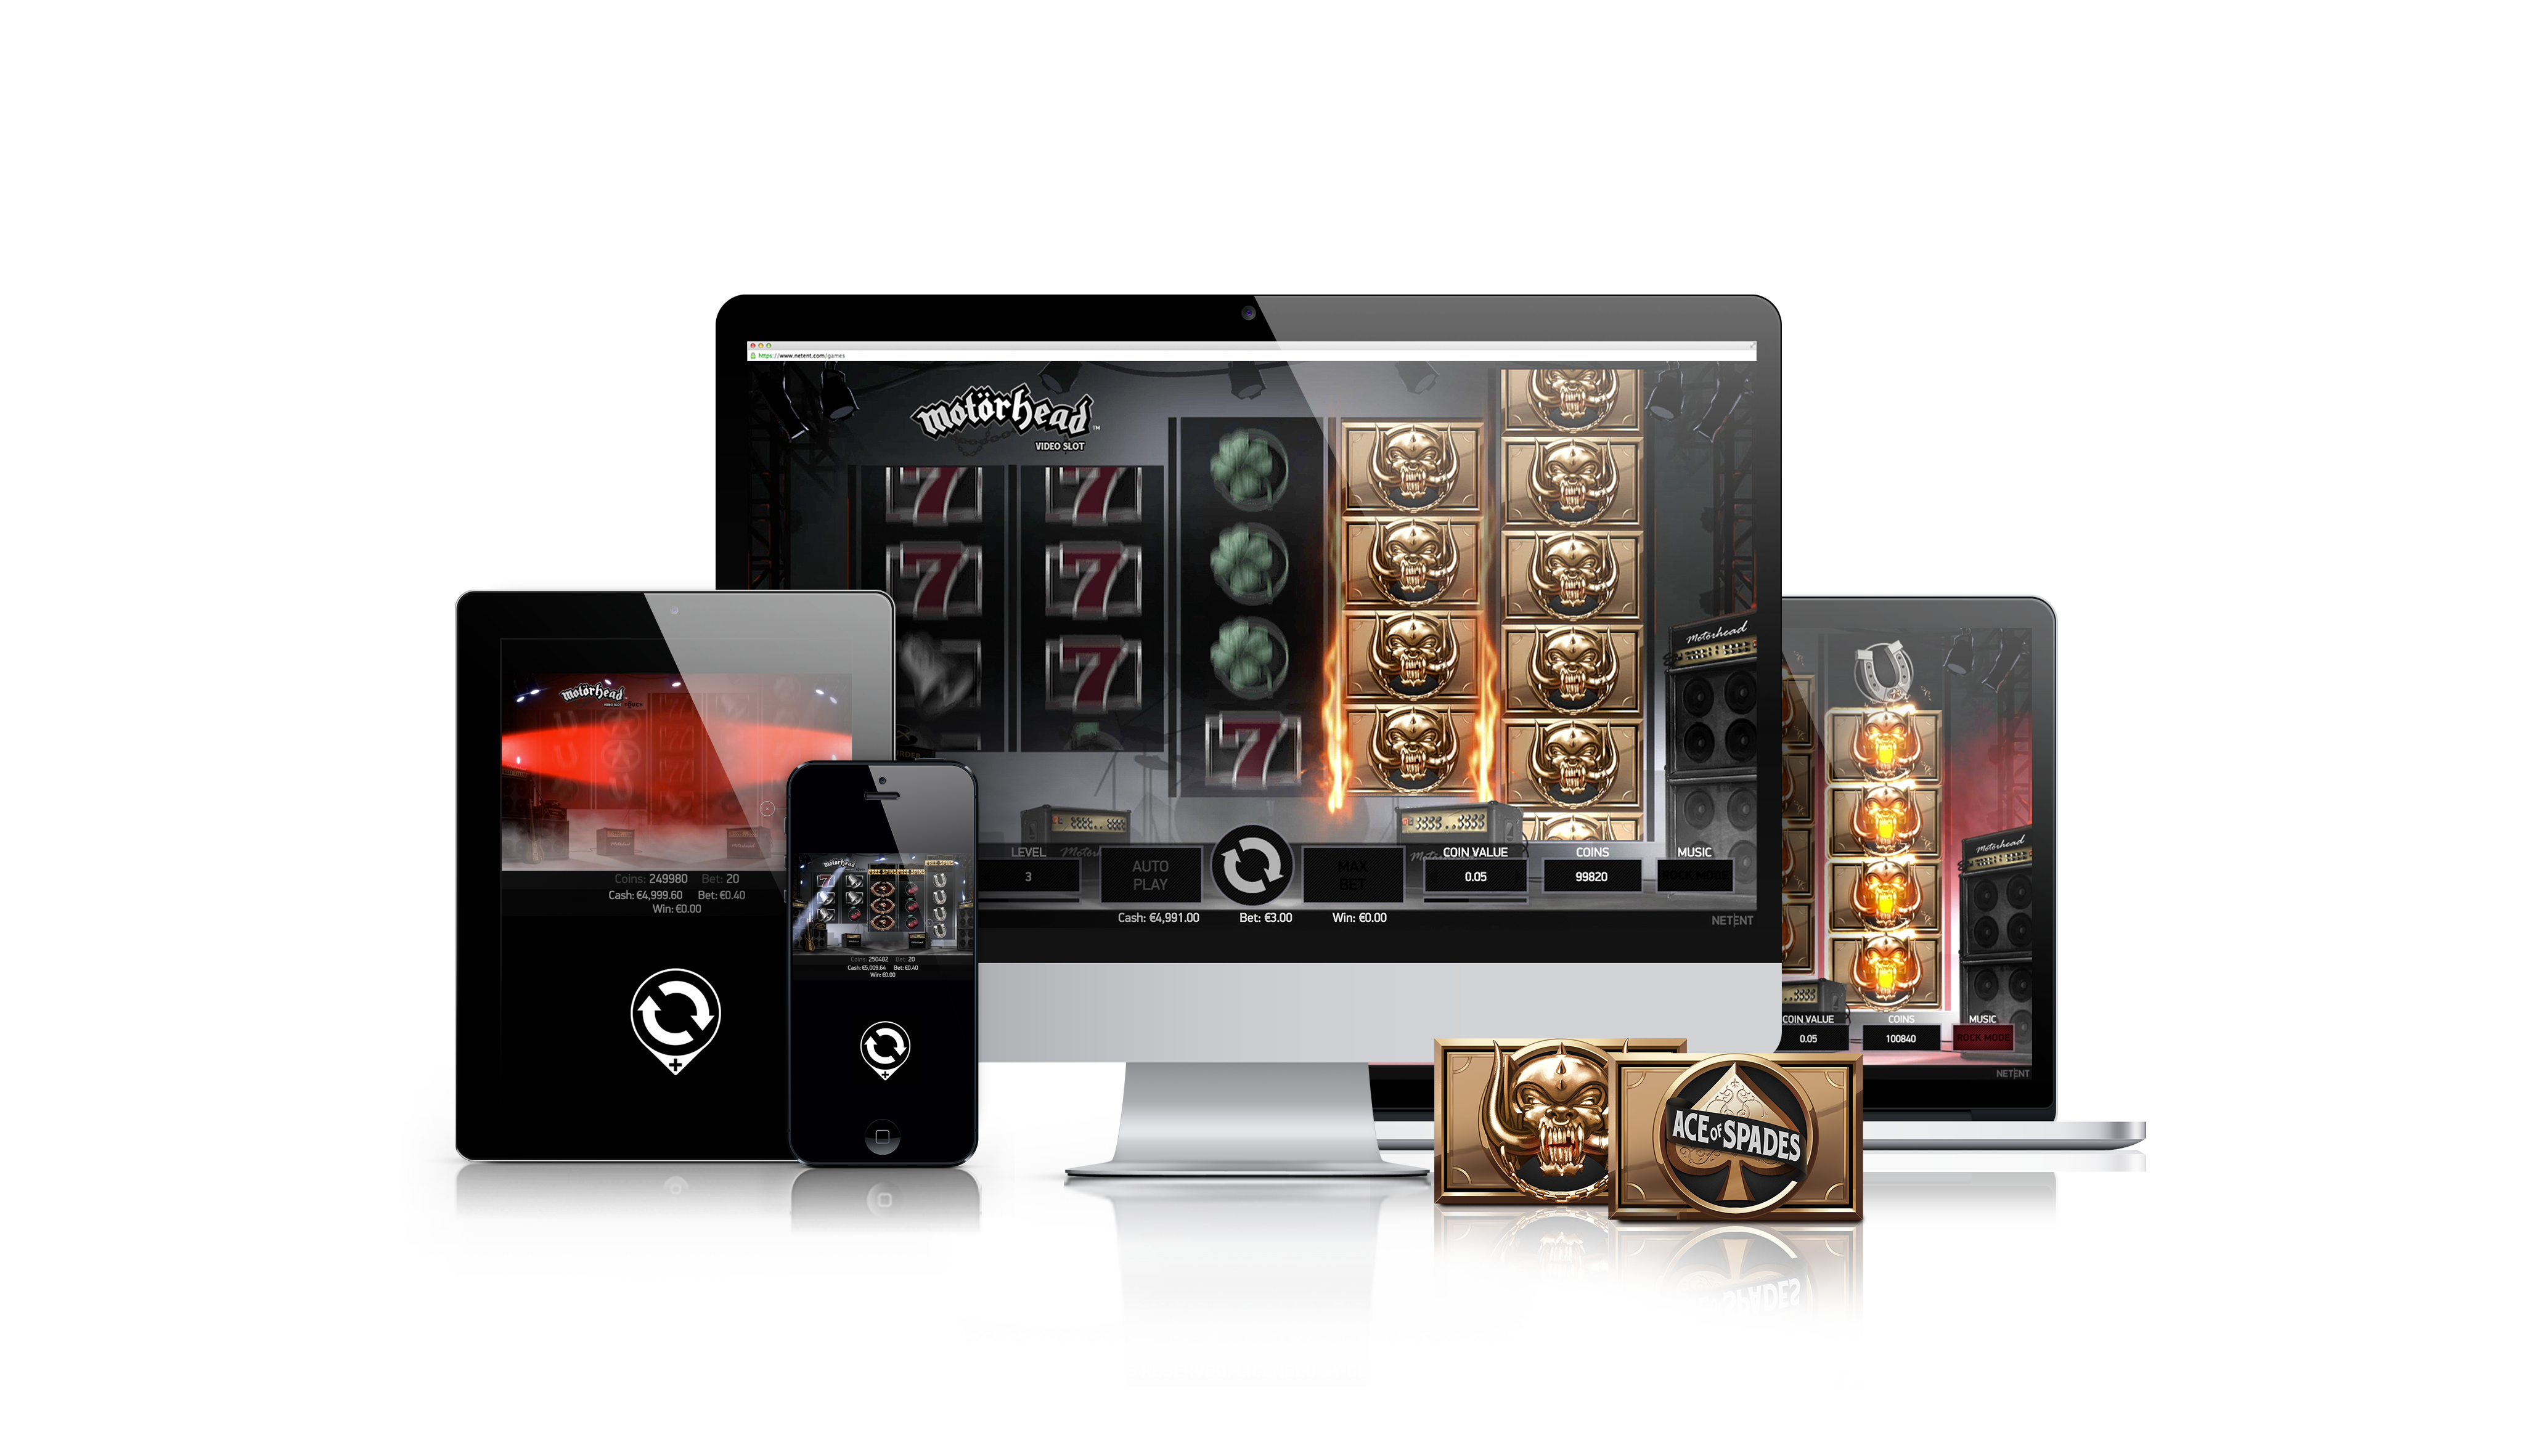 Ace of Spades slot by noga